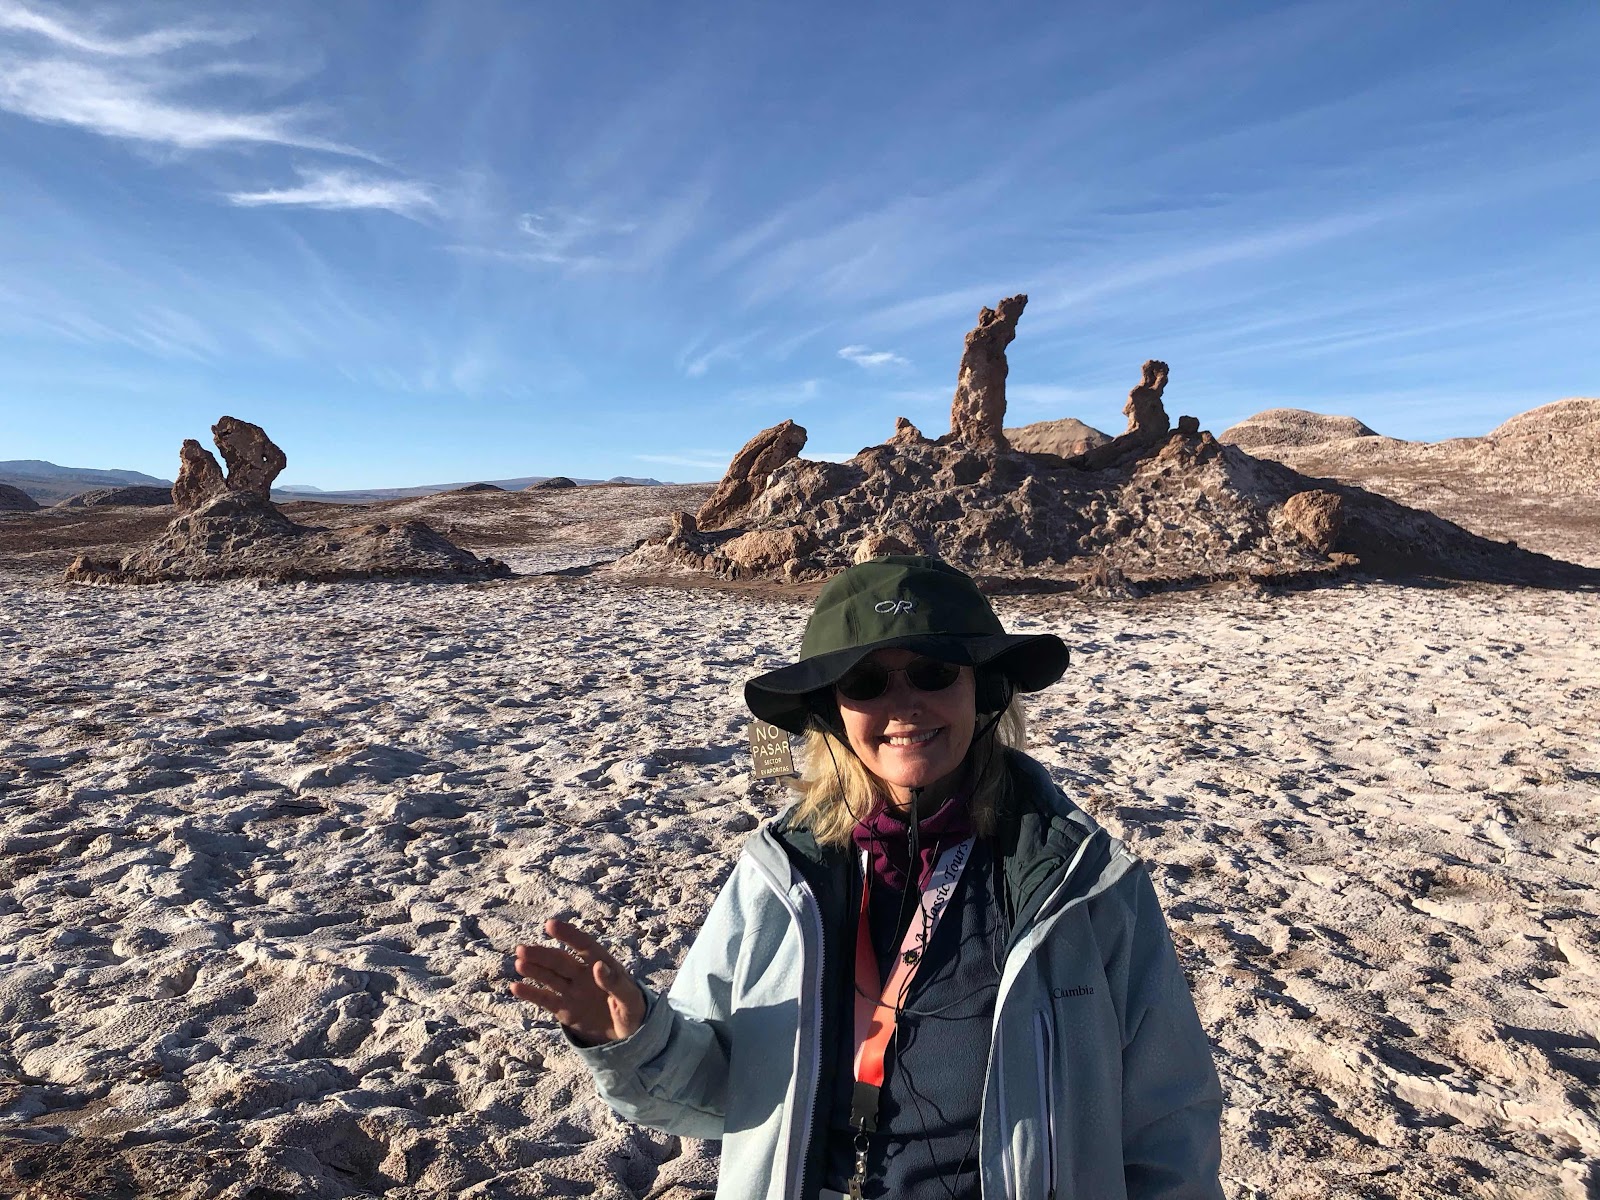 Resident Astronomer Peggy in front of weathered natural sculptures called the “Three Maria’s” (Source: Palmia Observatory)